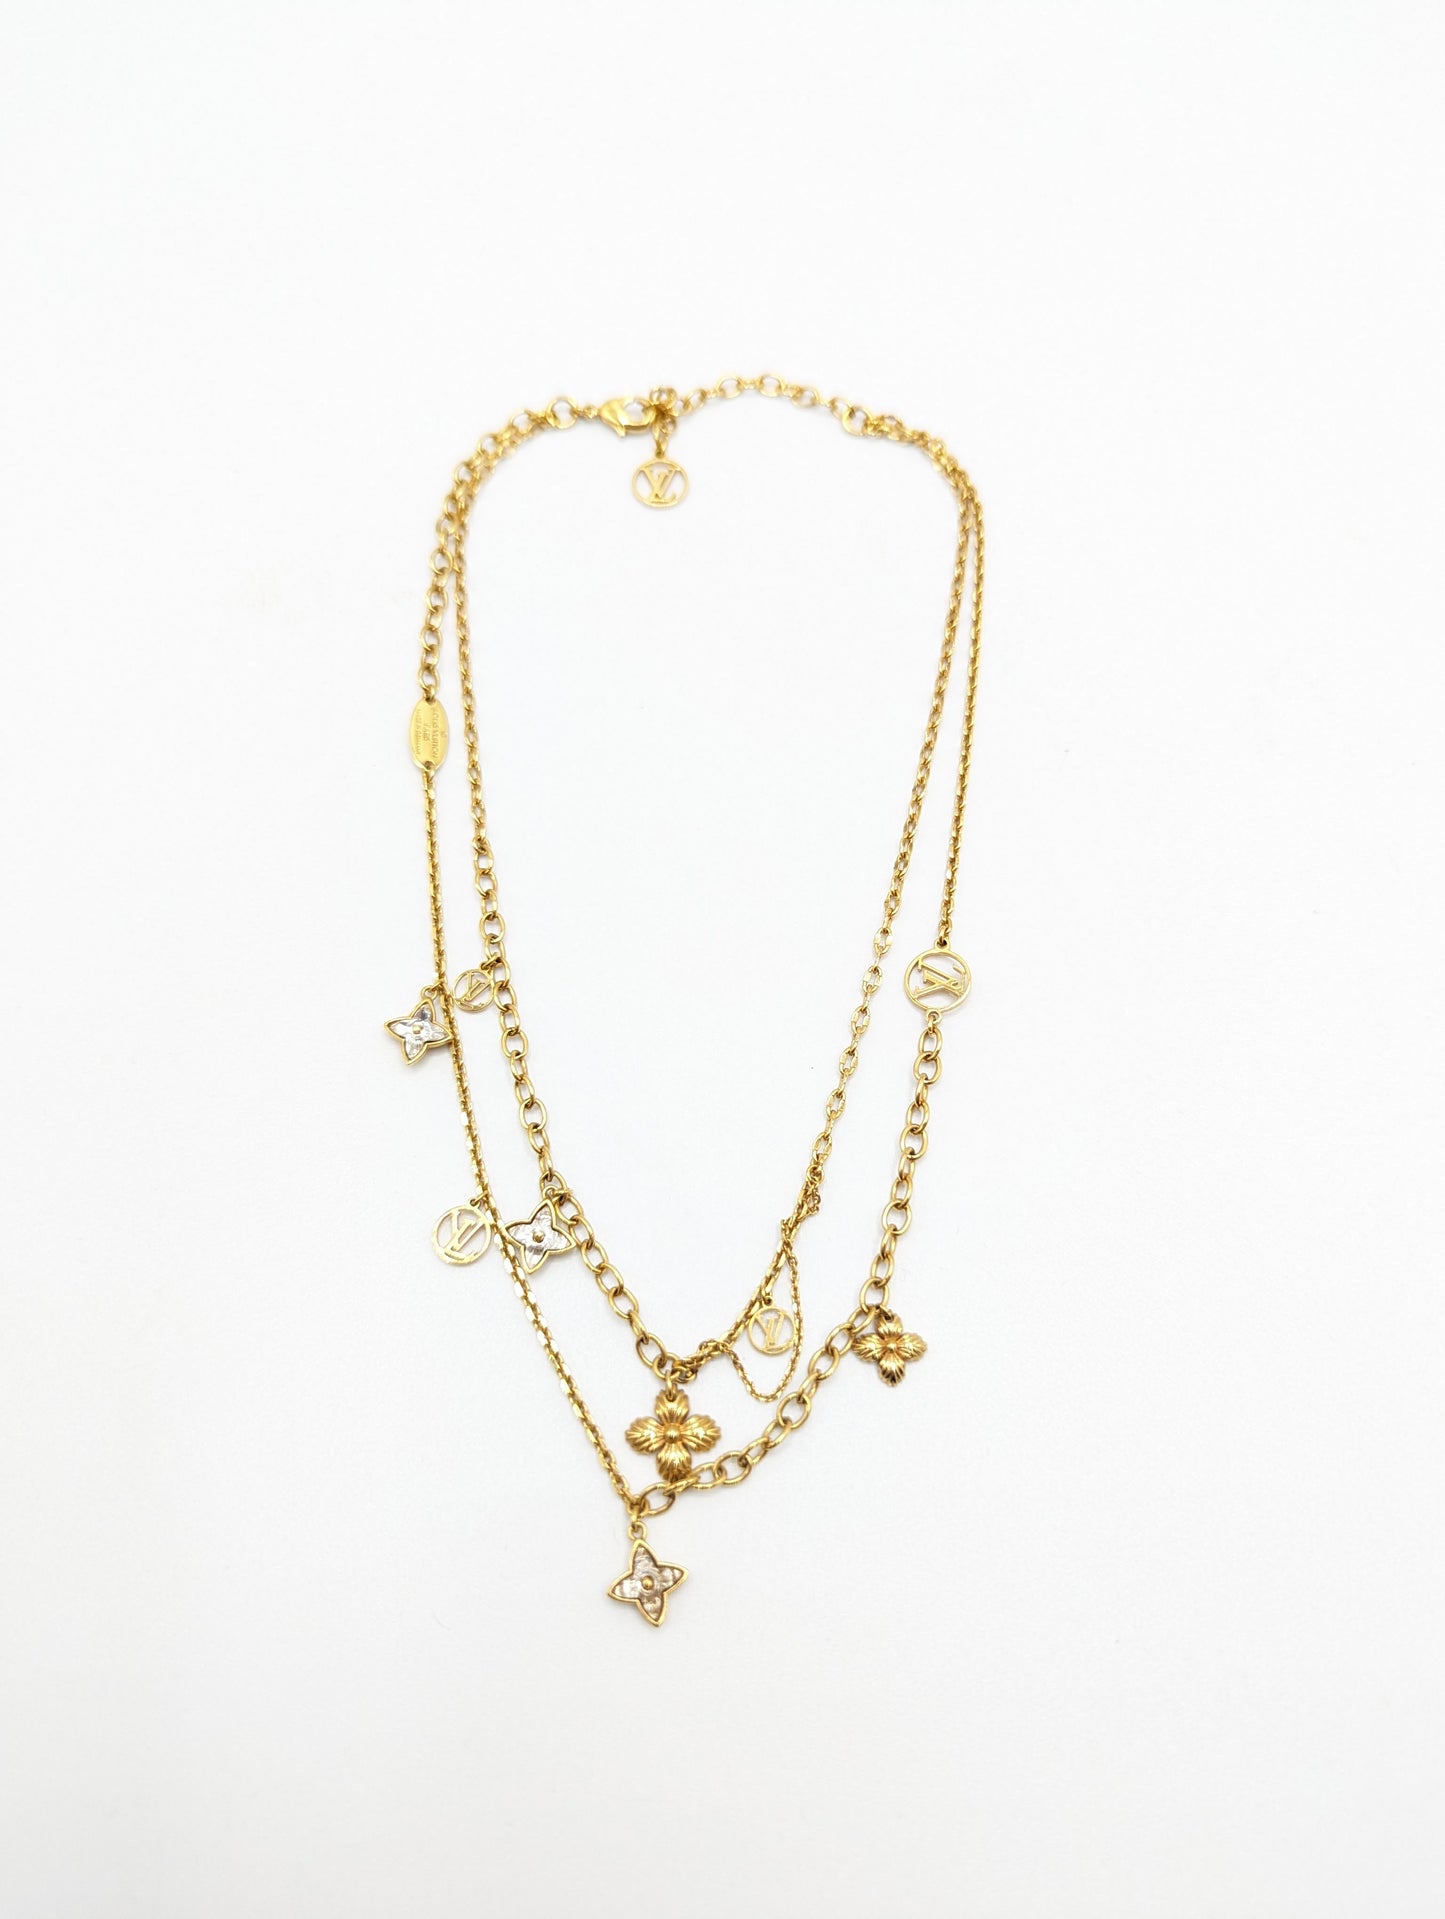 Buy Louis Vuitton Blooming Supple Necklace at